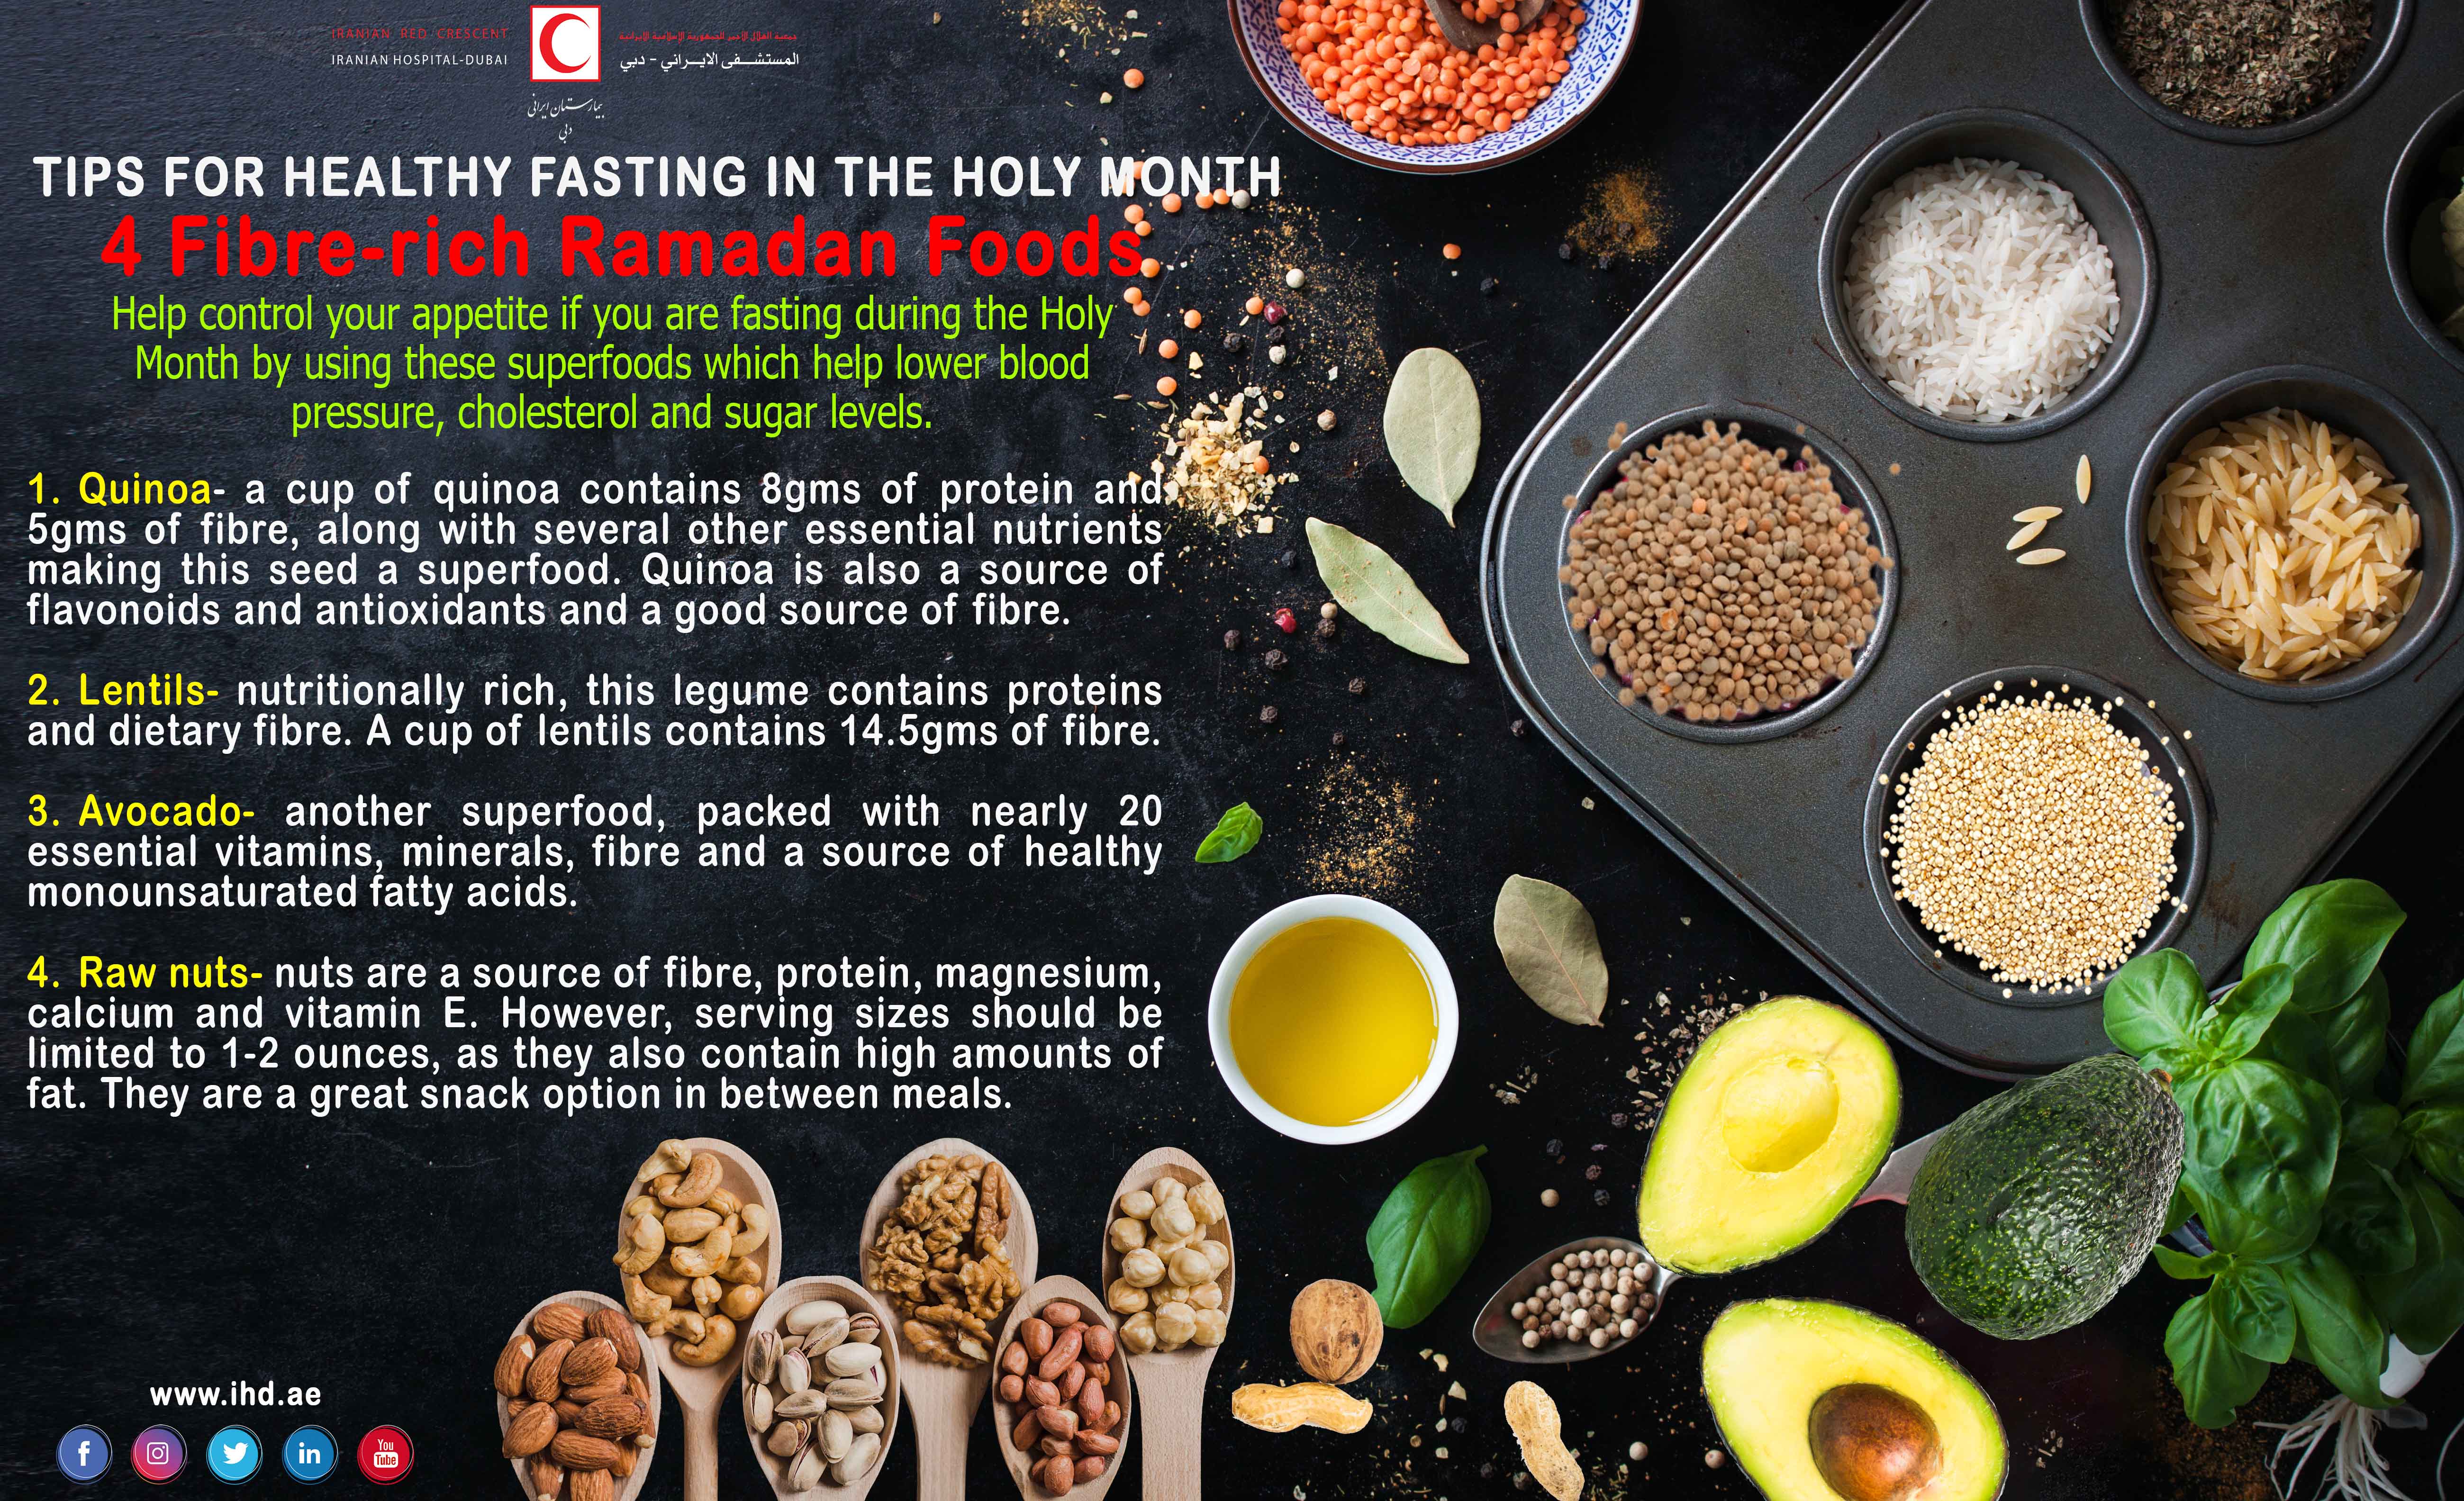 Tips for healthy fasting in the Holy Month 4 Fibre-rich Ramadan Foods